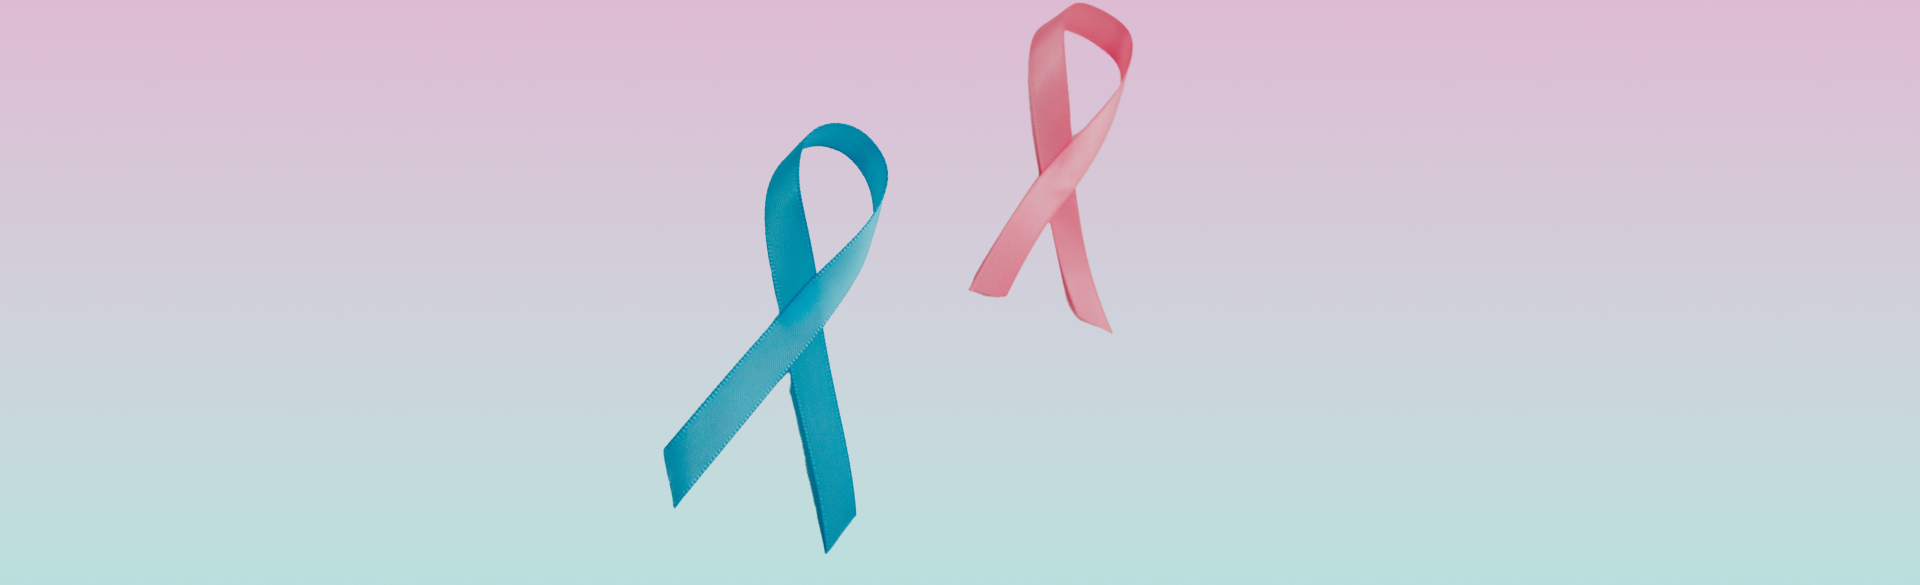 Teal and pink ribbons